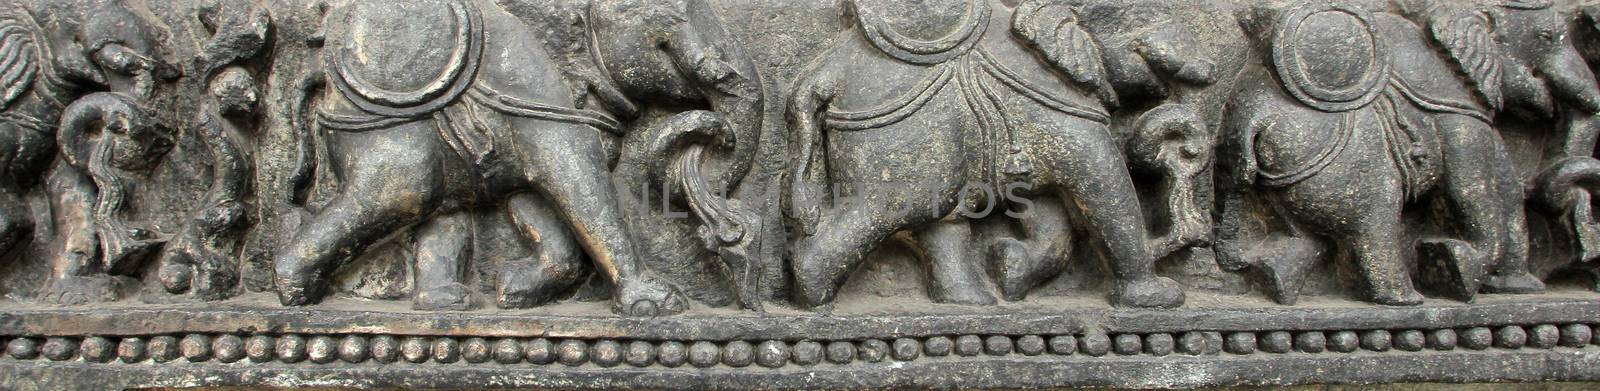 Elephants in a row, from 10th century found in Belvedere now exposed in the Indian Museum in Kolkata